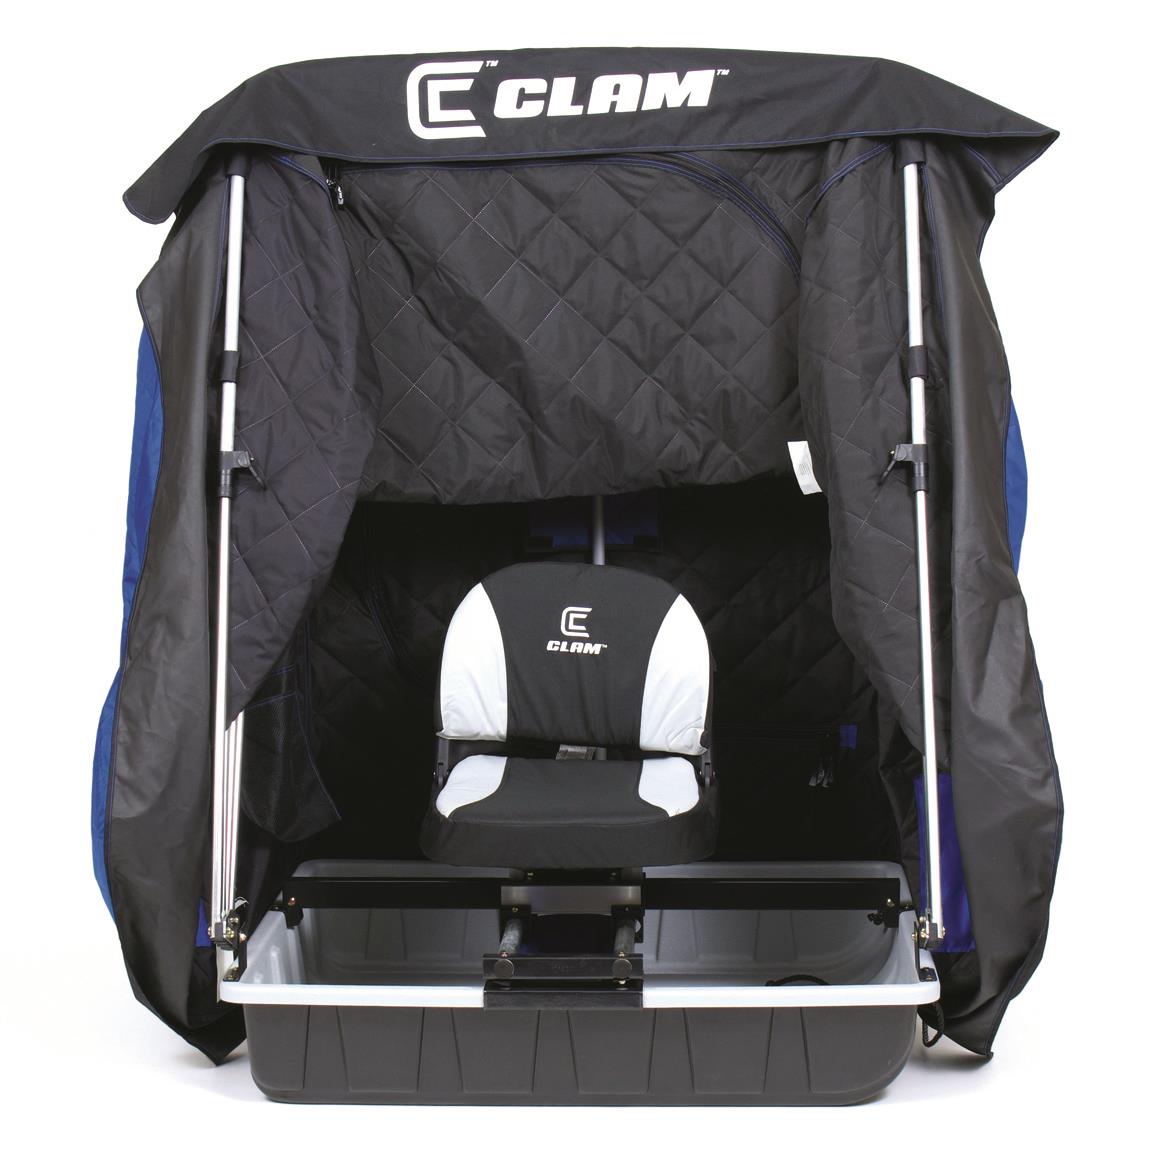 Clam Legend XL Thermal Ice Fishing Shelter with Chair